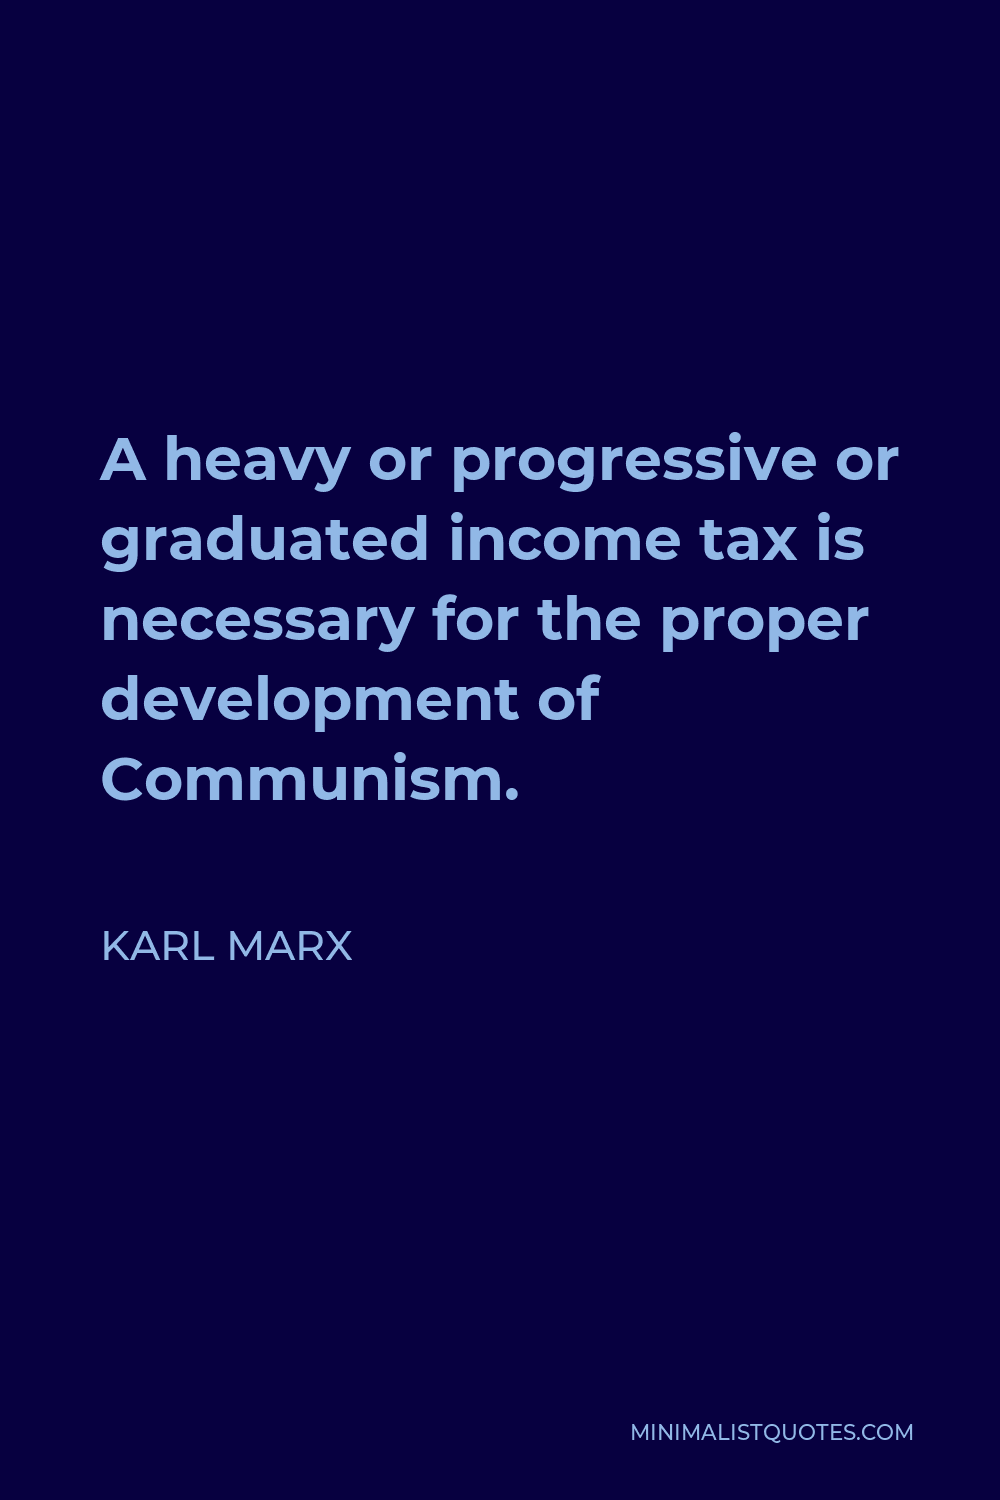 Karl Marx Quote - A heavy or progressive or graduated income tax is necessary for the proper development of Communism.